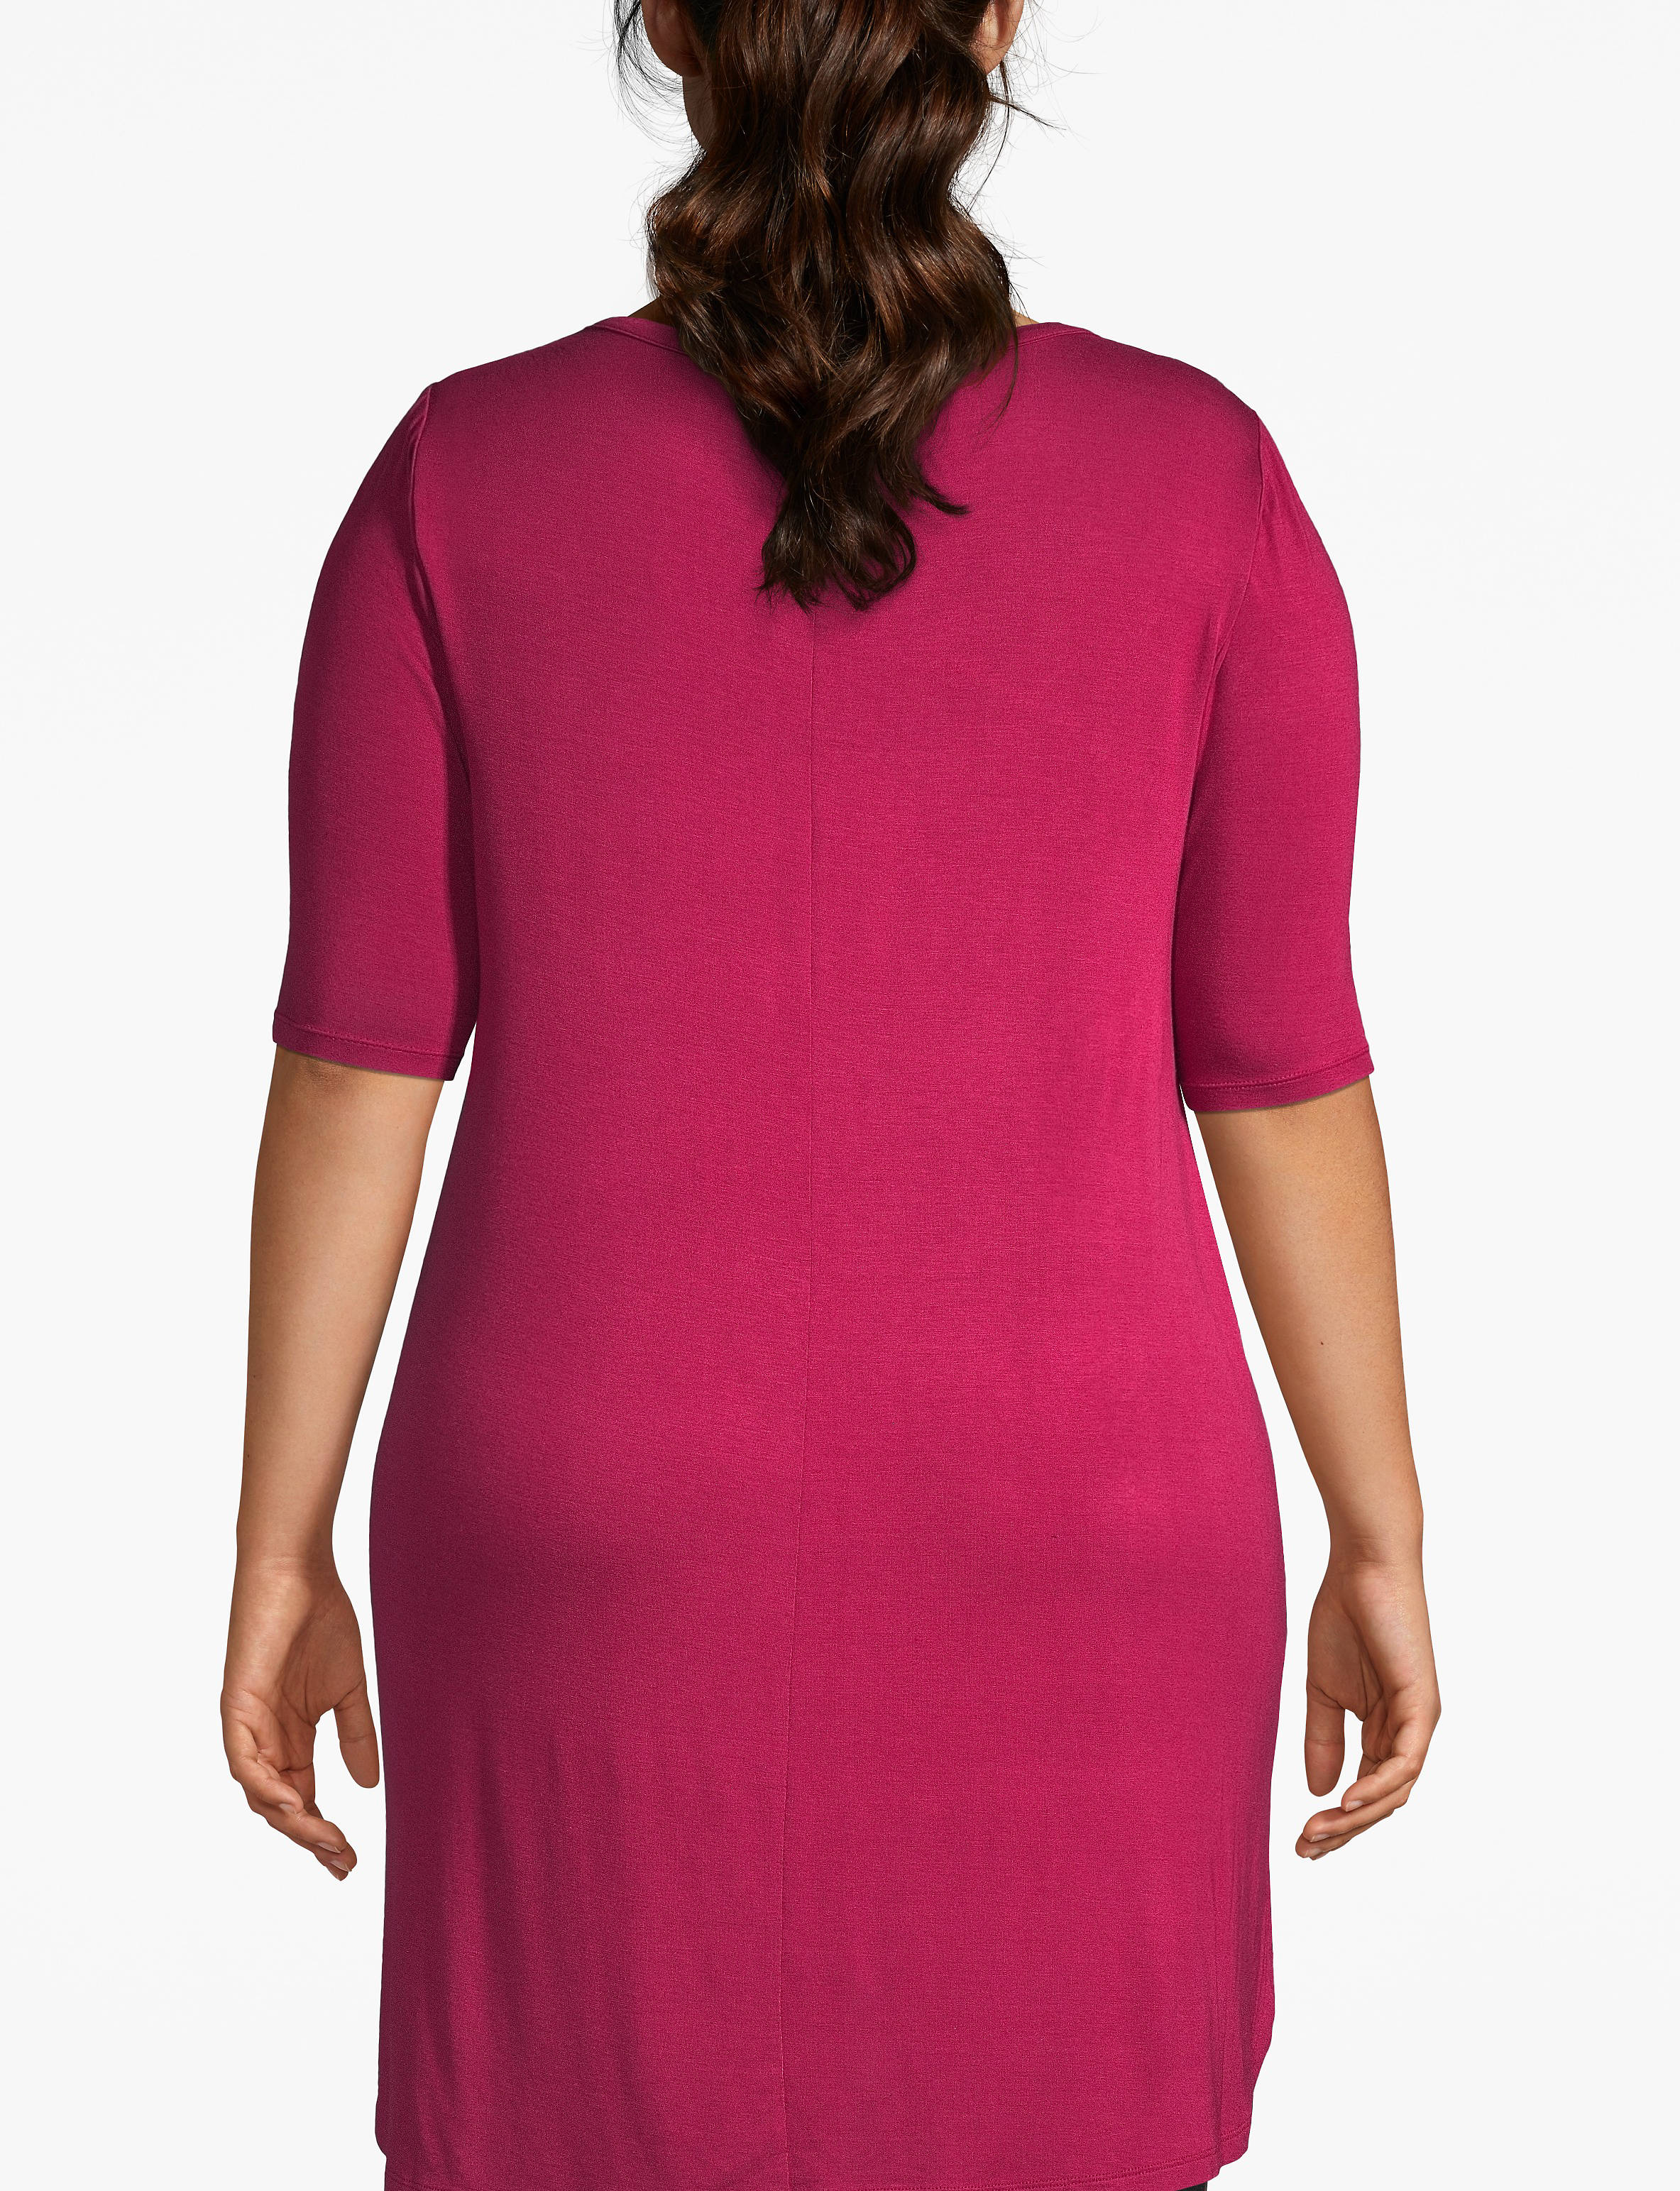 Livi Outlet Elbow Sleeve Scoop Neck Tunic F 1113993:PANTONE Beet Red:14/16 Product Image 2